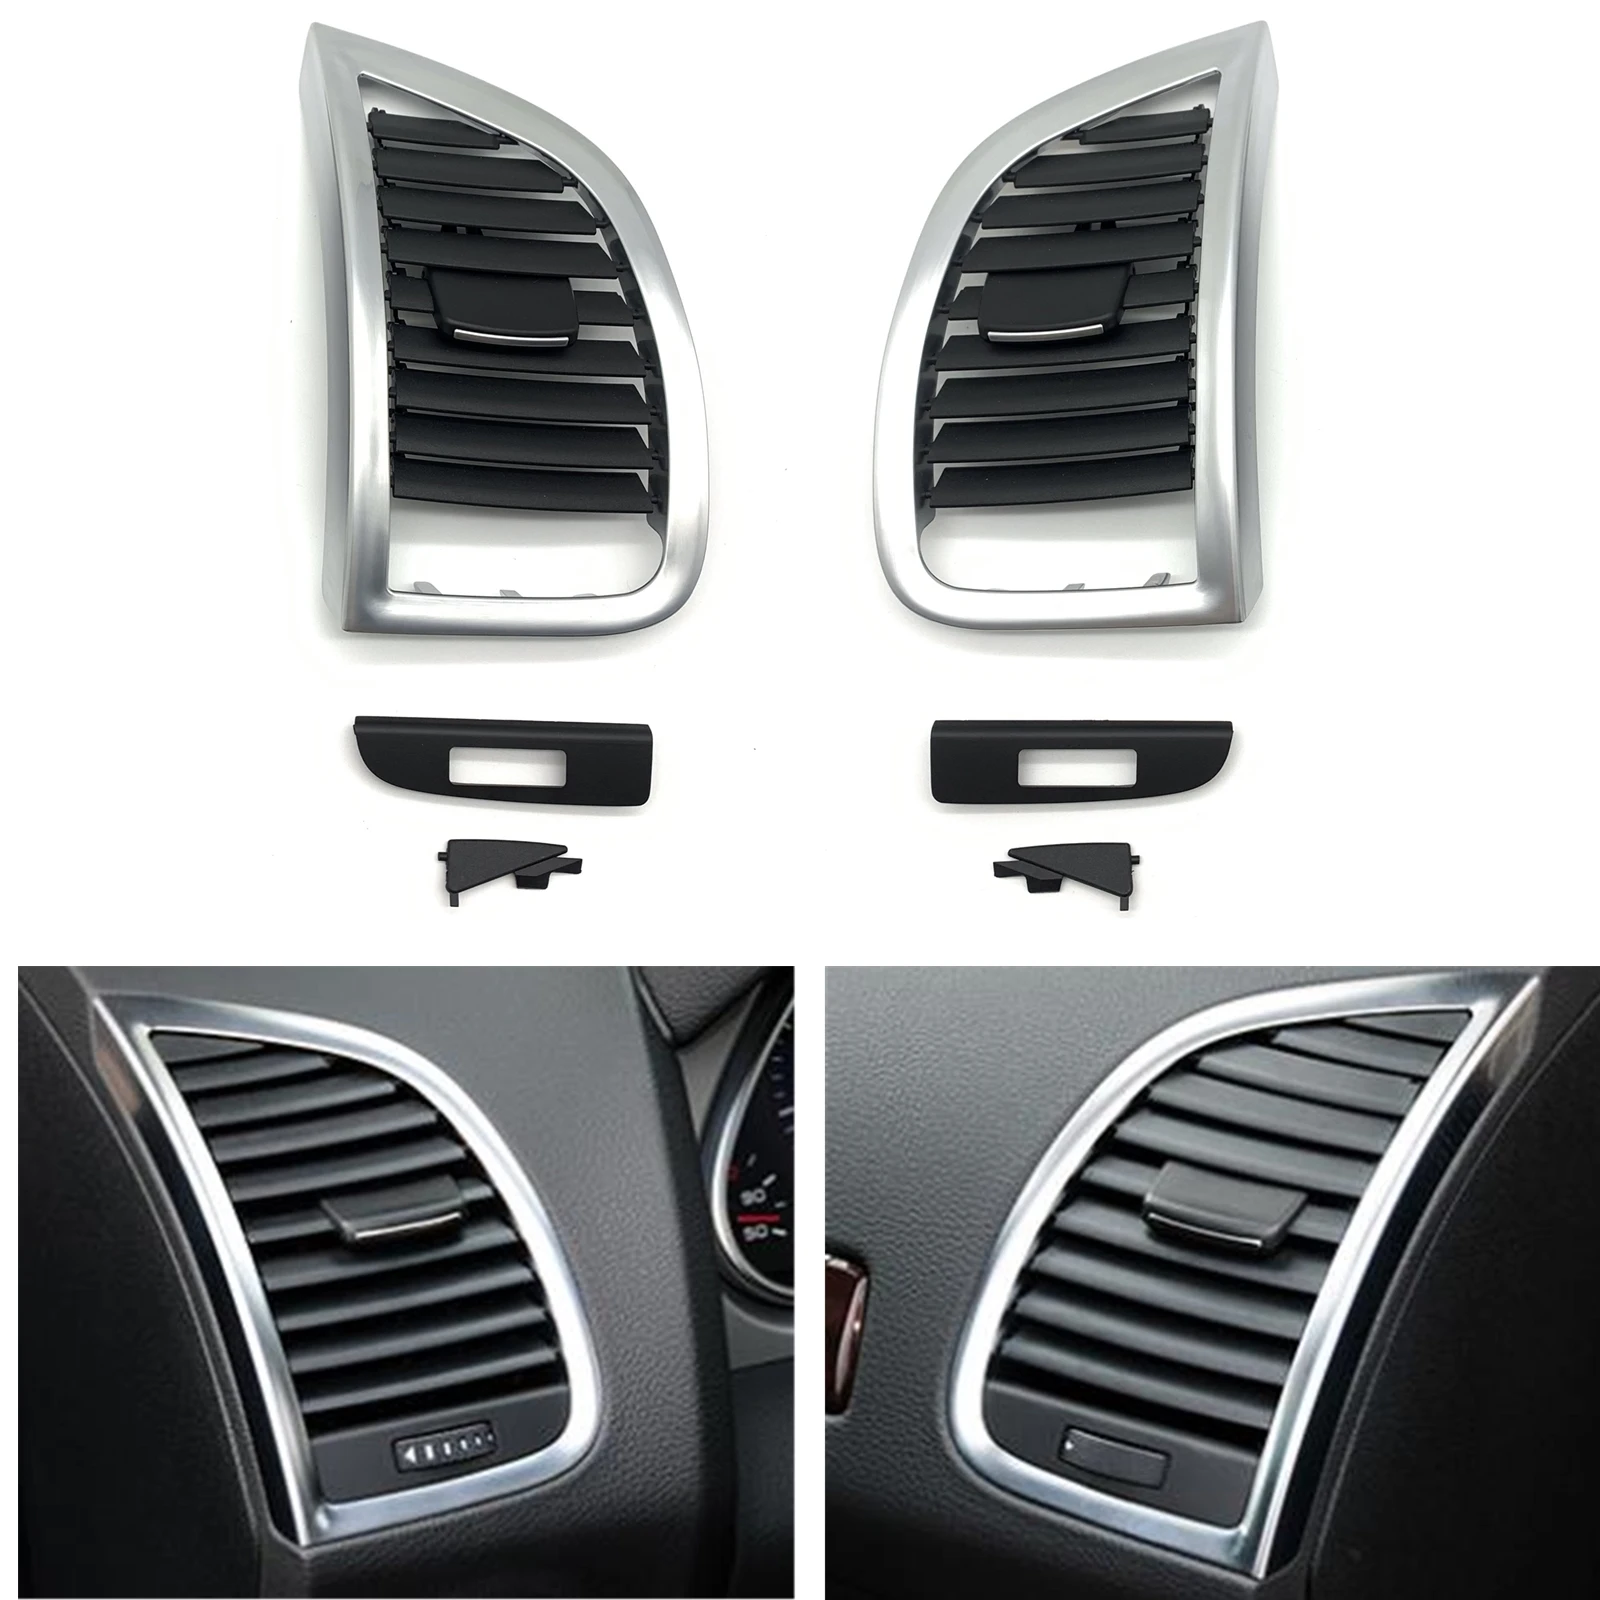 

For Audi Q7 2007-2015 Car Interior Dashboard A/C Air Vent Grille Cover Panel Dash Board Side Outlet Duct Conditioning Grill Trim